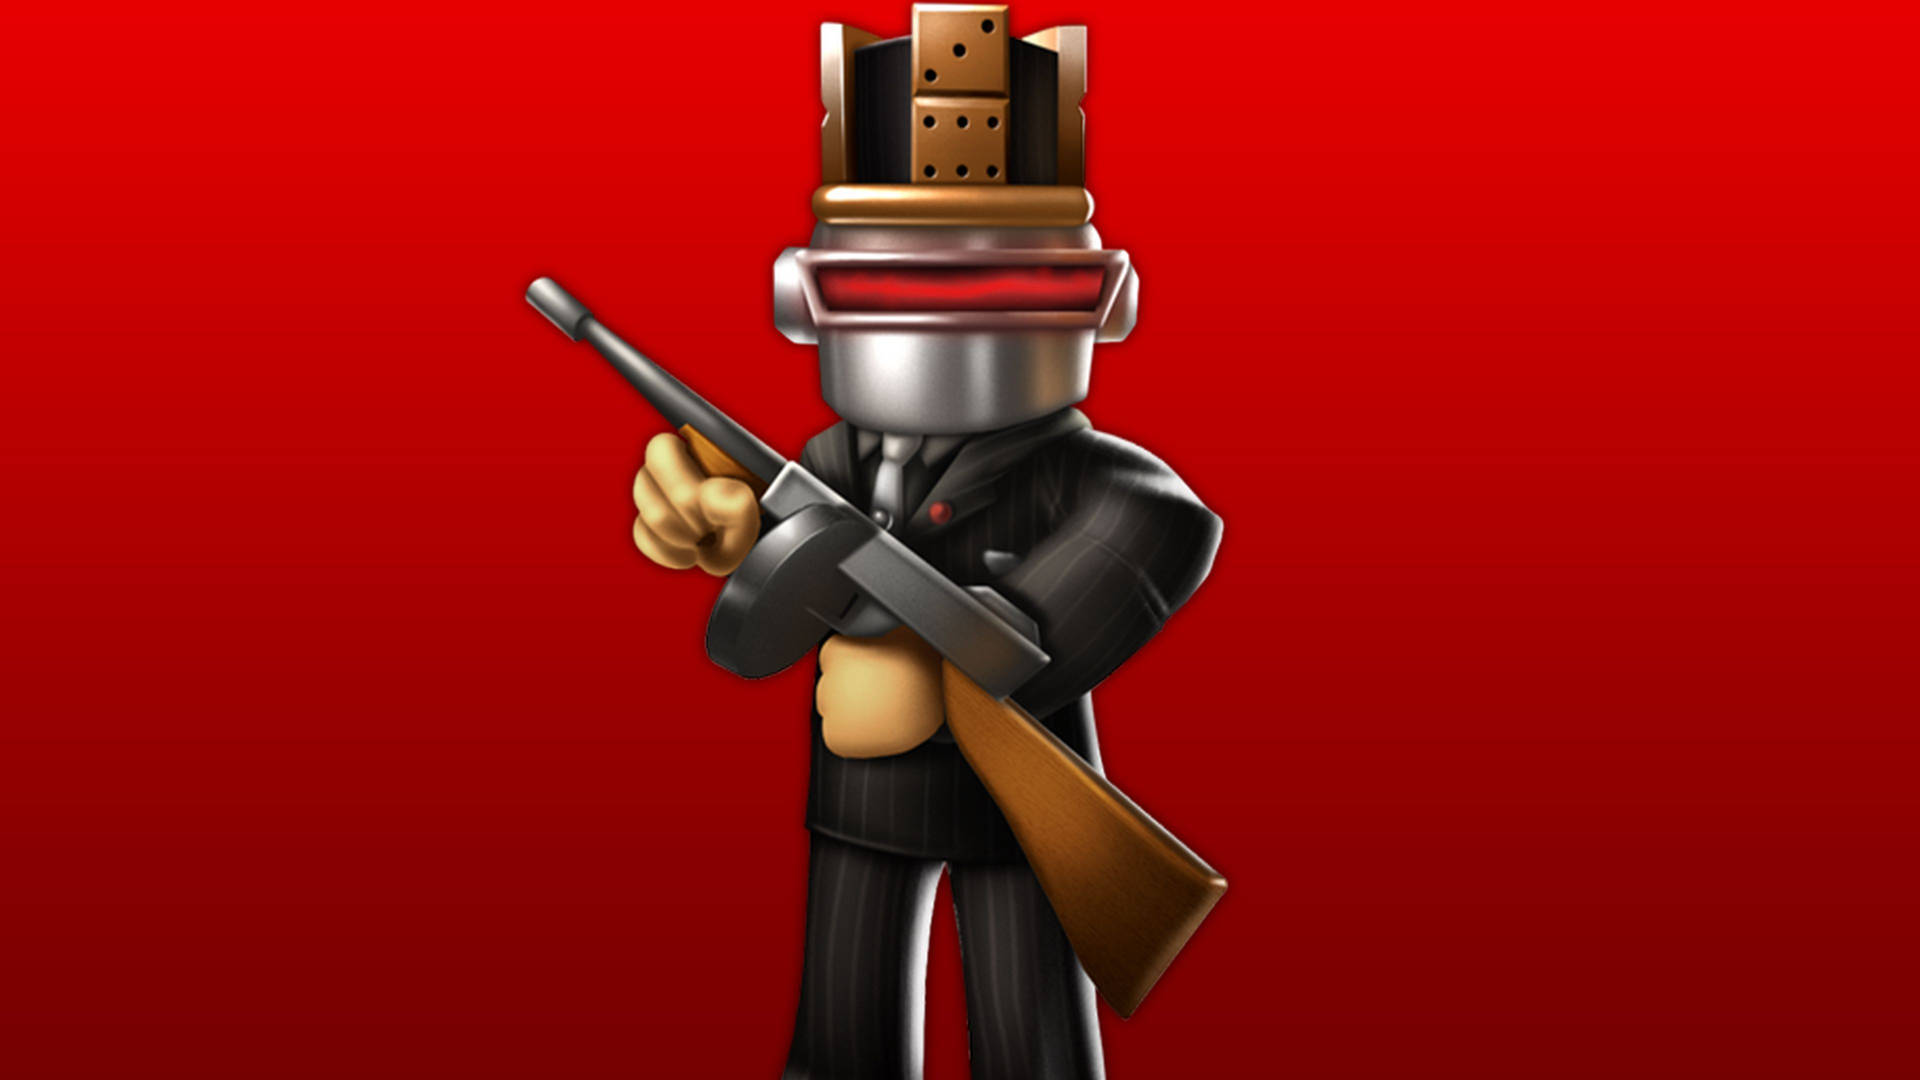 3840X2160 Roblox Wallpaper and Background